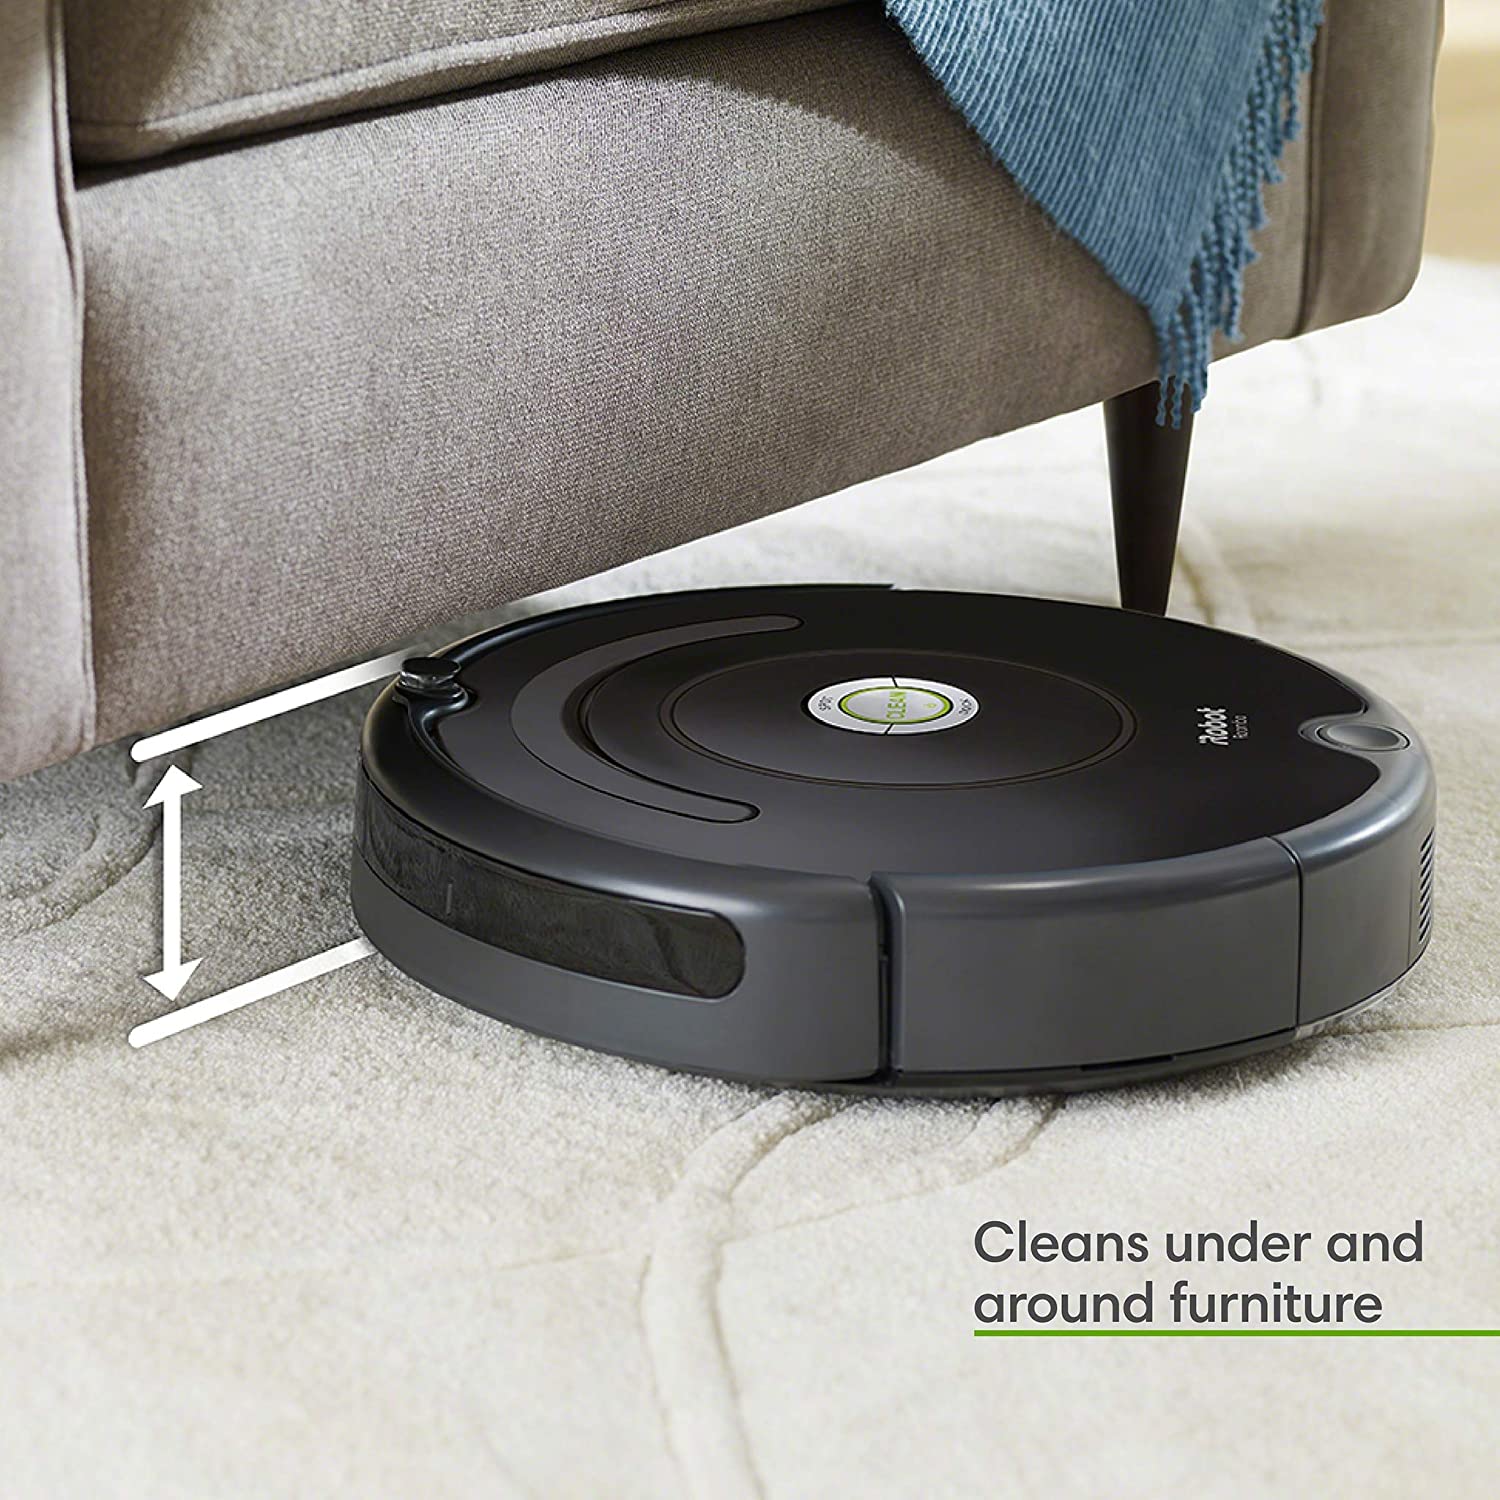 iRobot Roomba 675 Robot Vacuum-Wi-Fi Connectivity, Works with Alexa, Good for Pet Hair, Carpets, Hard Floors, Self-Charging - image 3 of 9